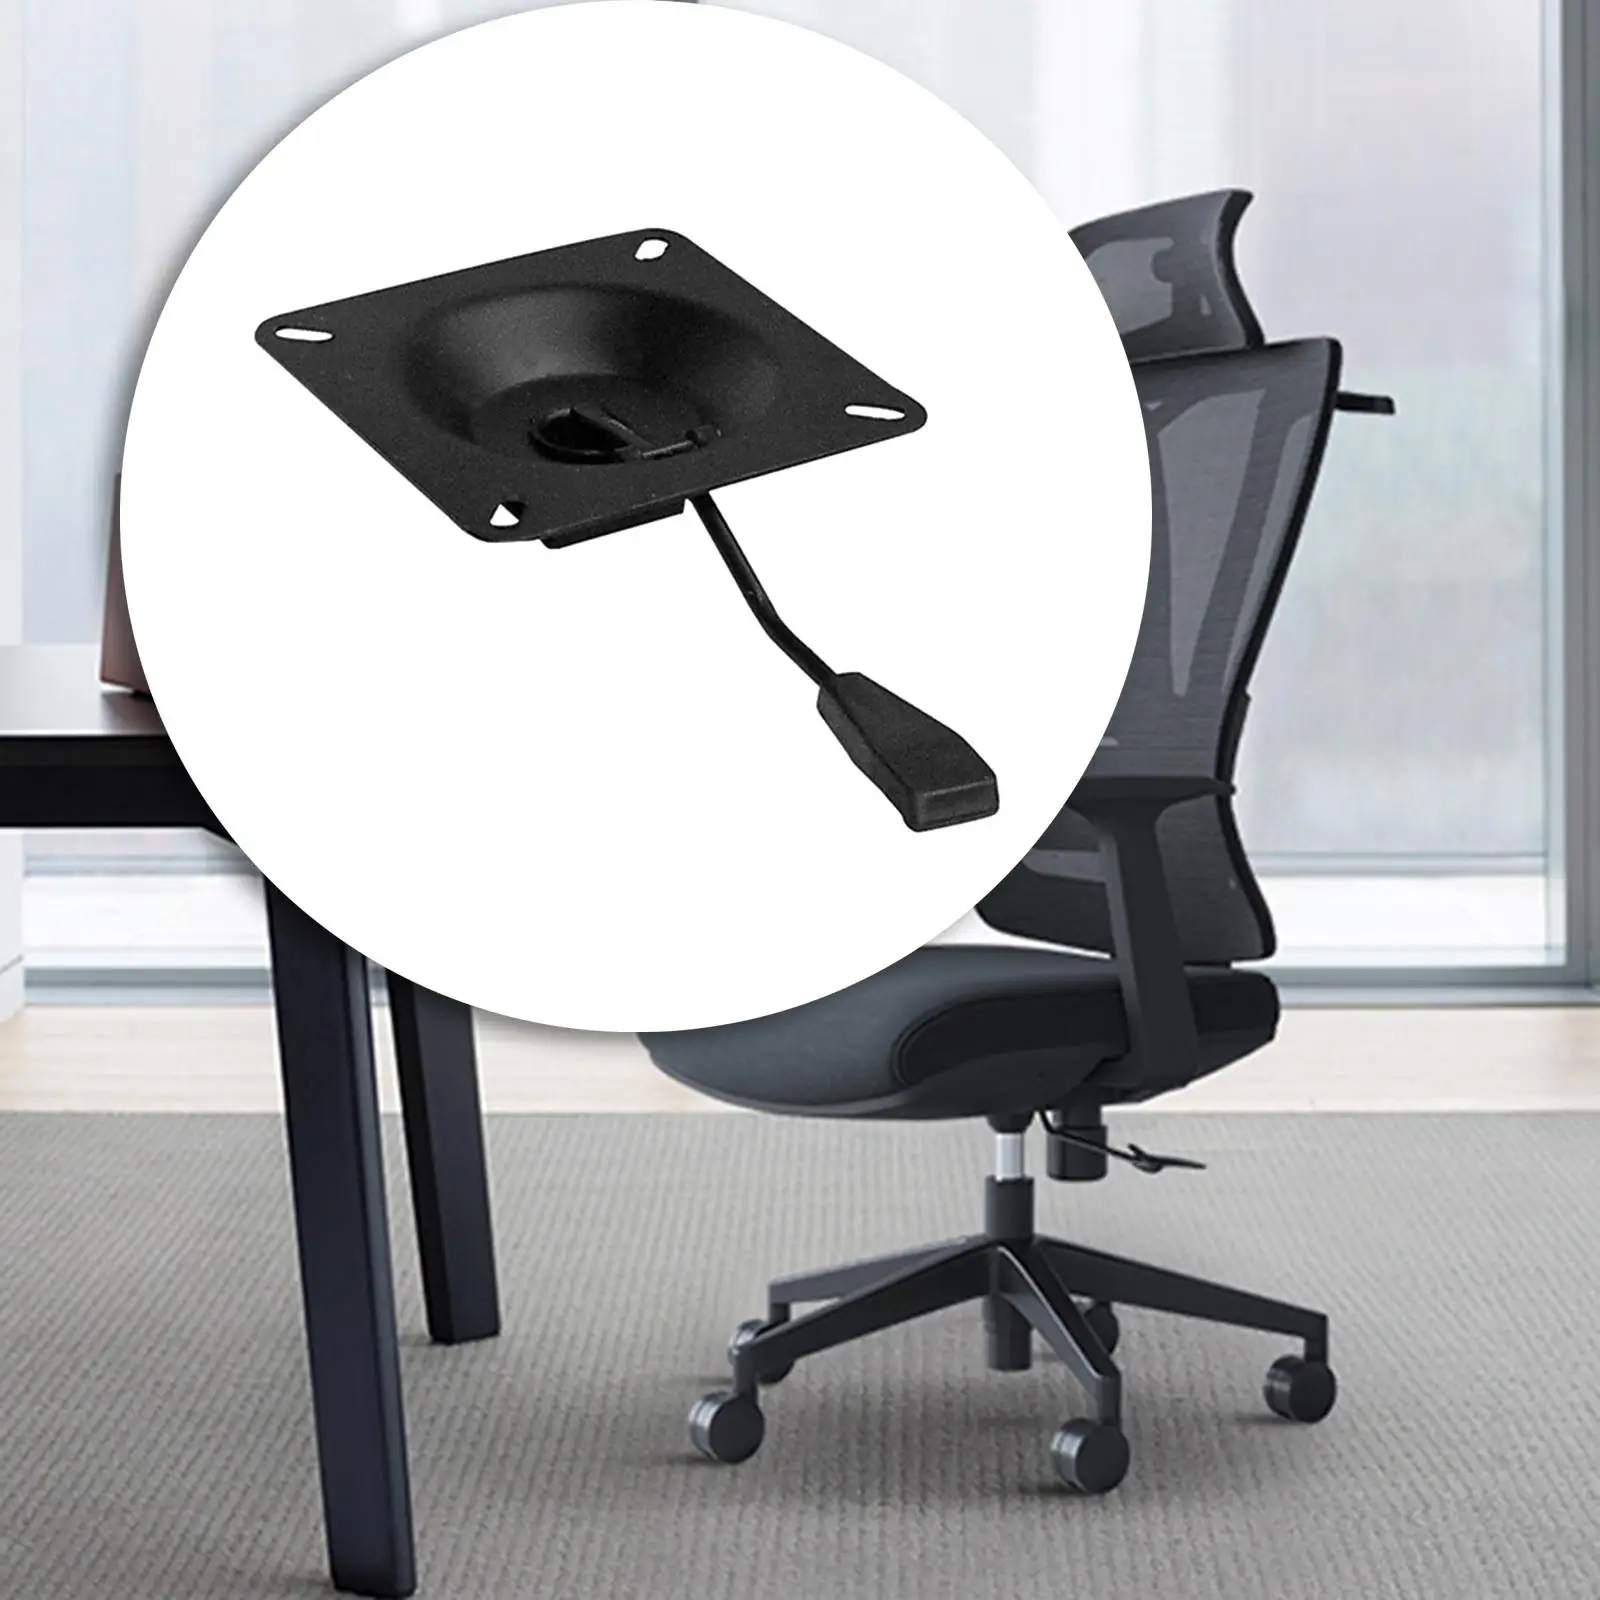 Office Chair Tilt Control Seat Mechanism Chair Swivel Base Plate Heavy Duty for Gaming Chairs Bar Stool Office Chairs Furniture